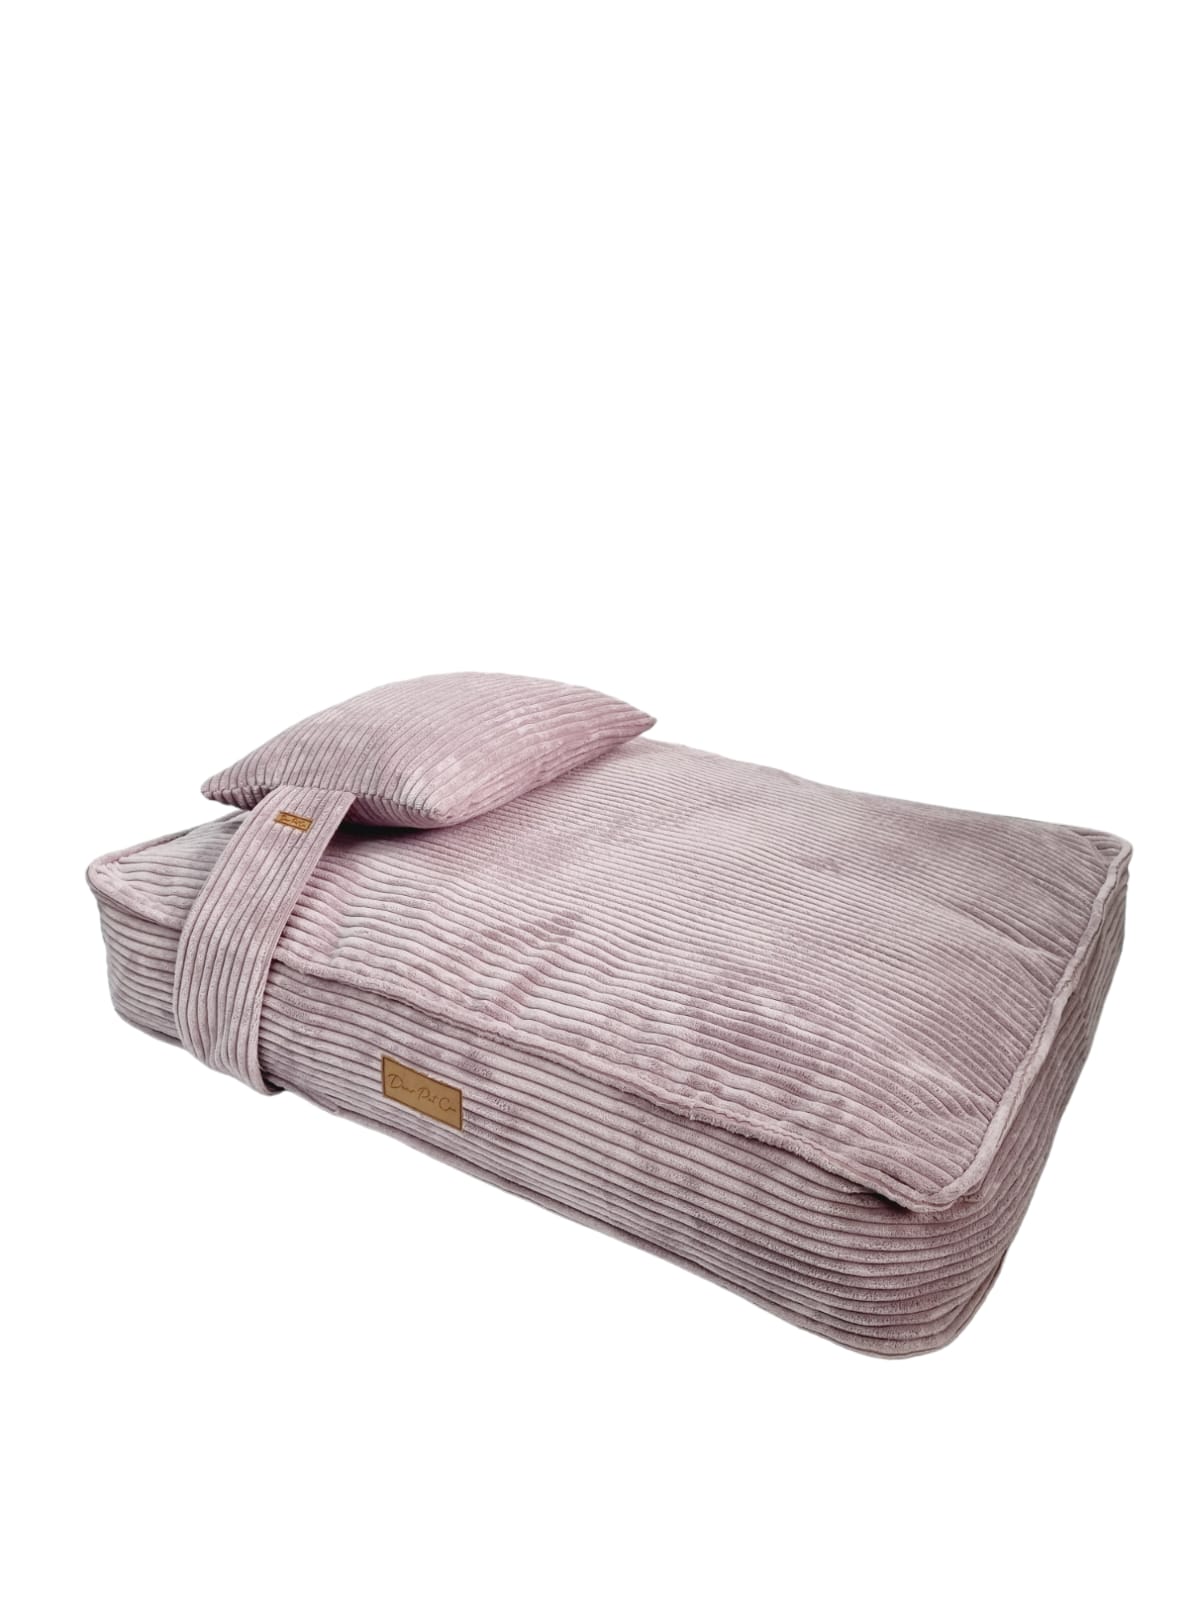 Luxury Lounger Pet Bed | Dirty Plum Pawduroy